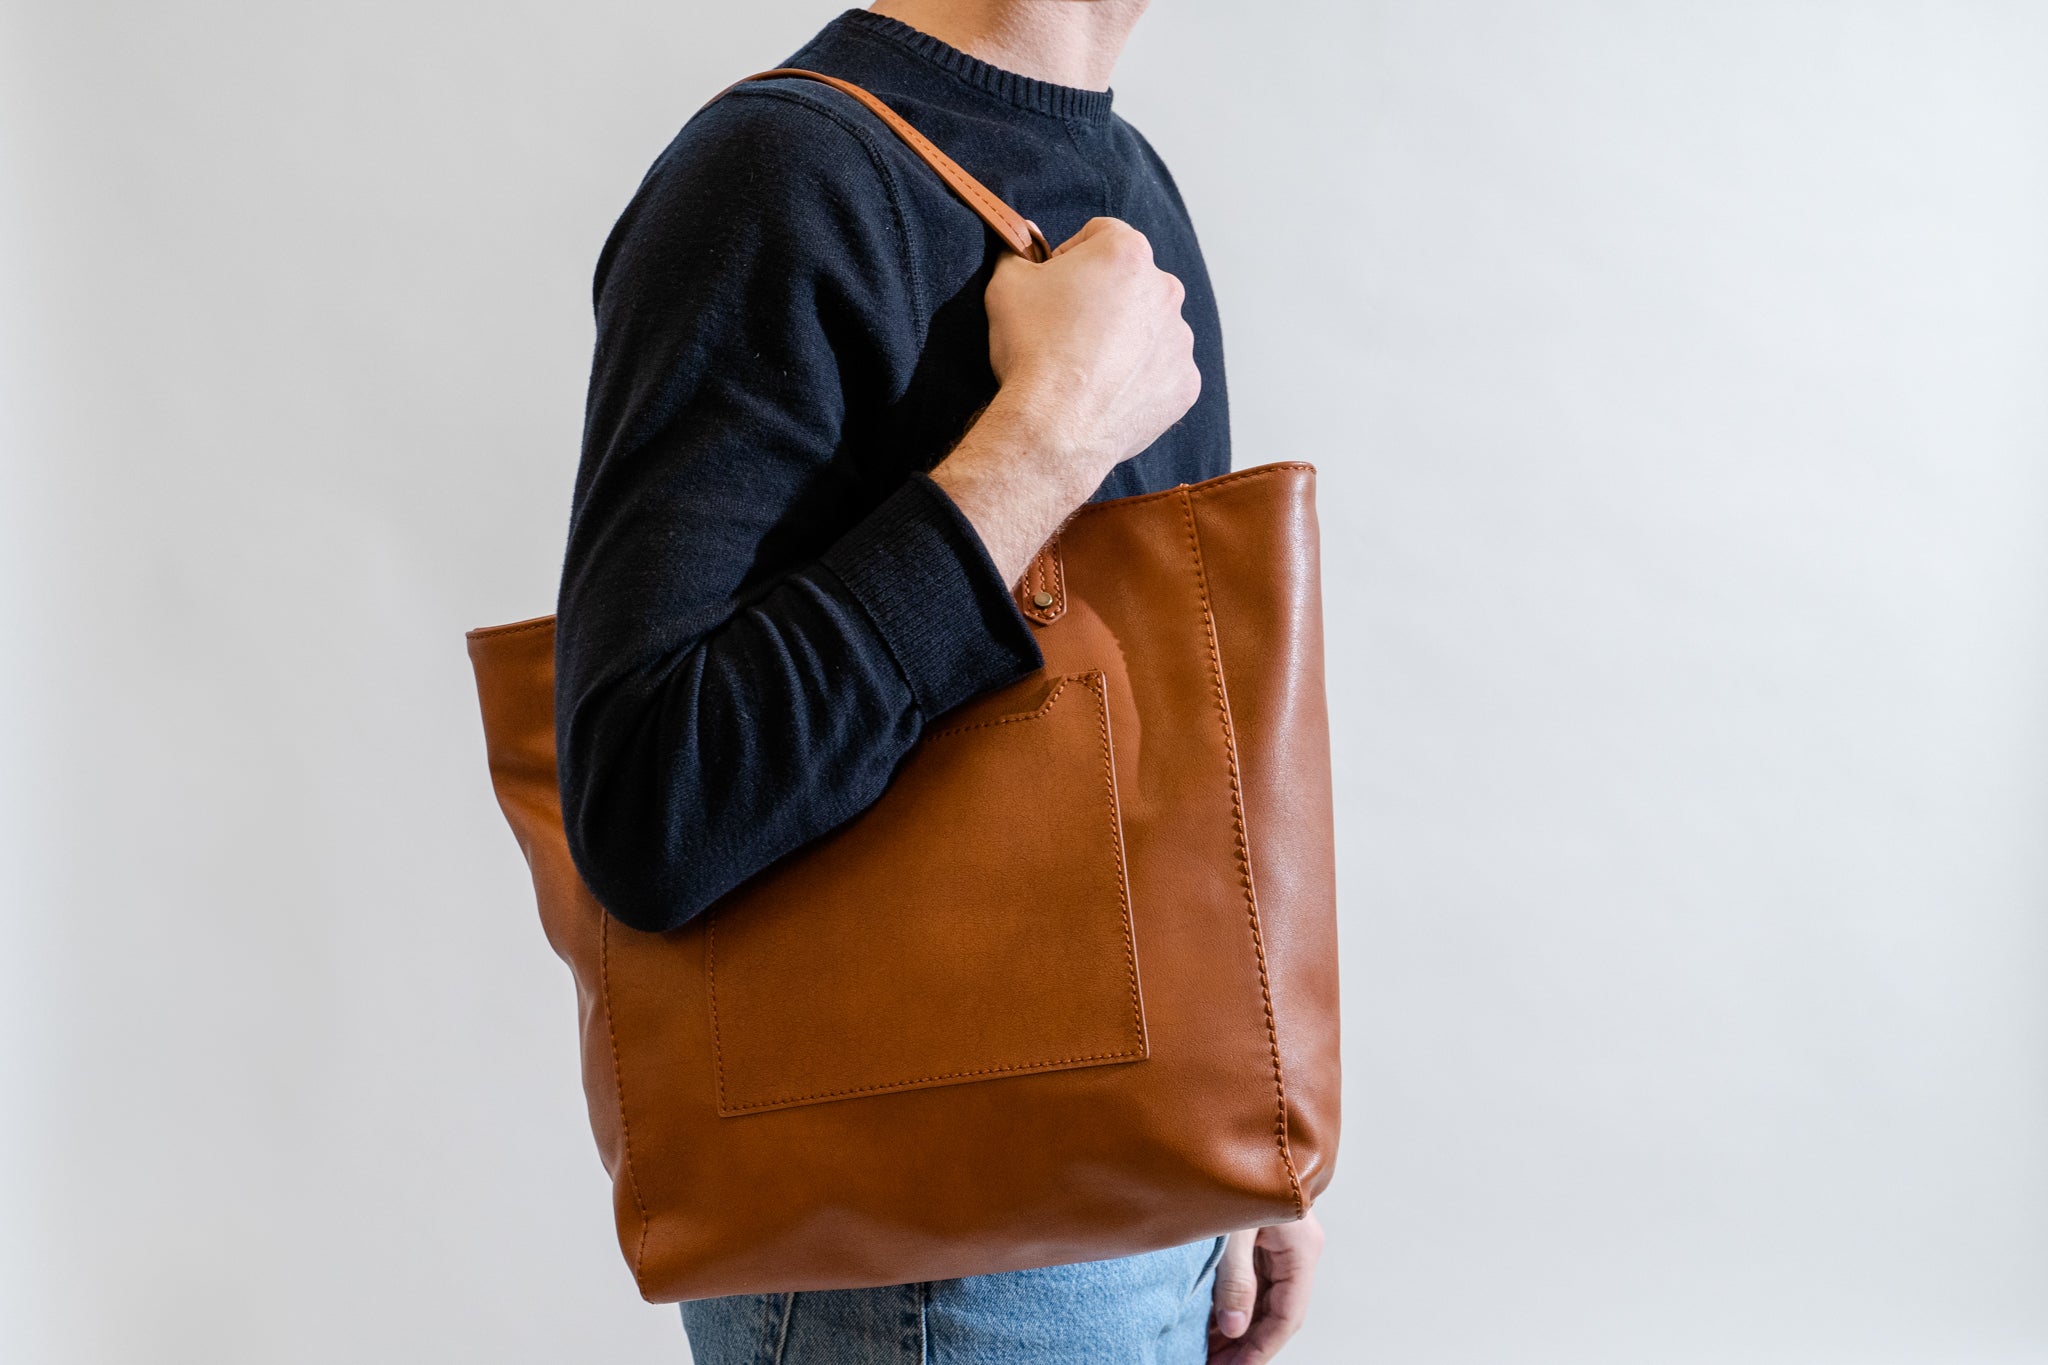 A person wearing the Universal Thread tote on their shoulder.